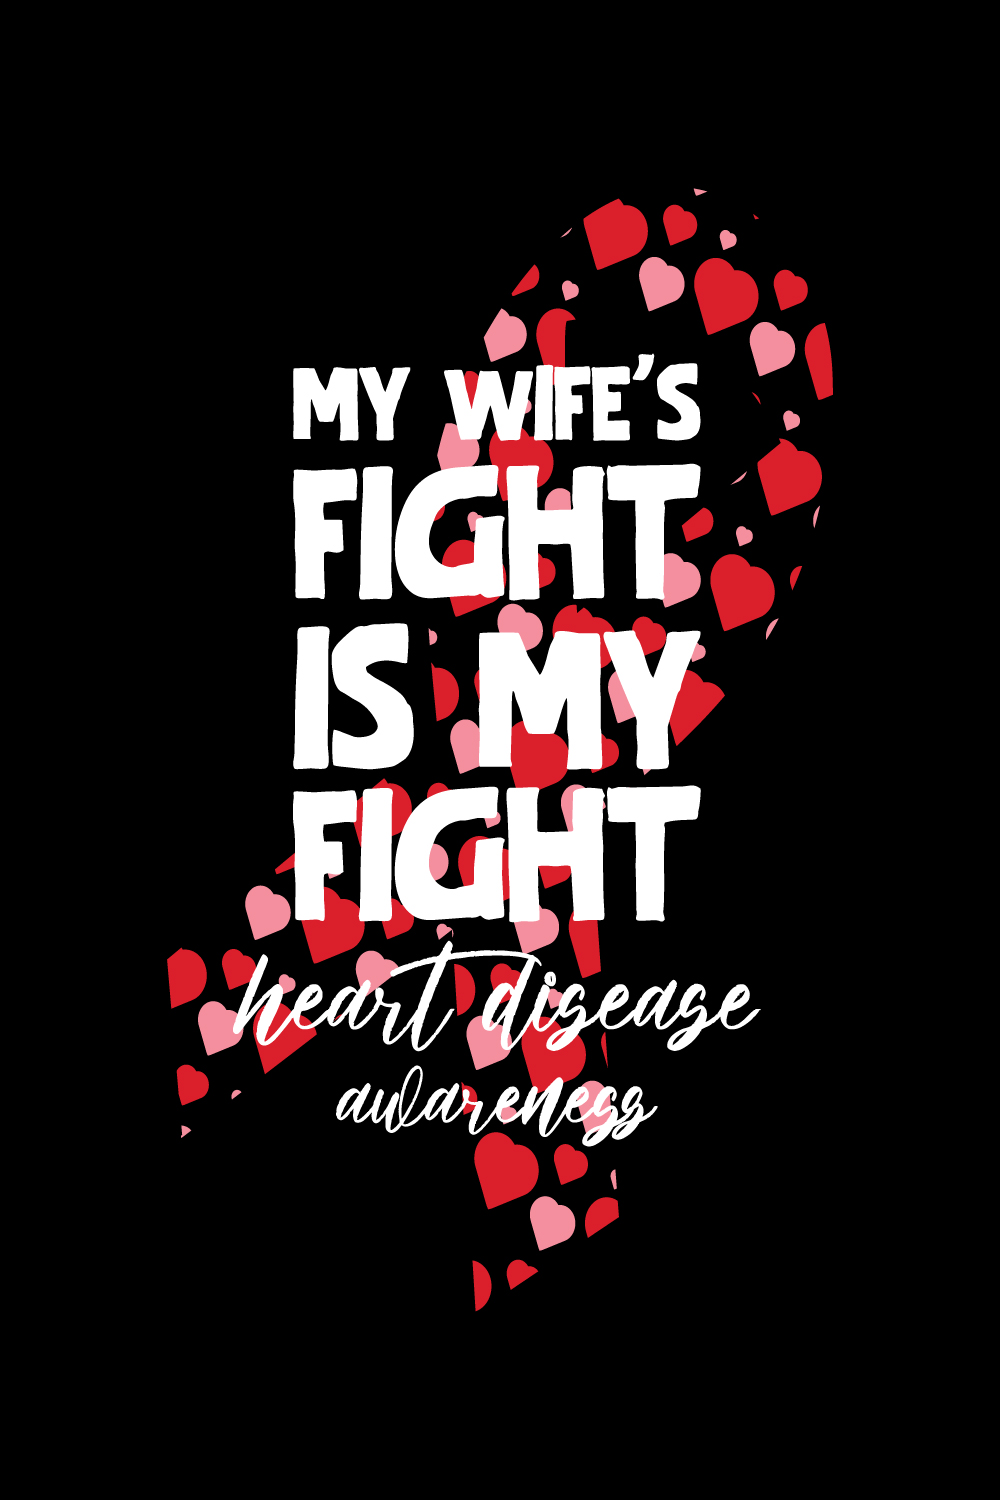 My WifeFight Is My Fight Heart Disease Awareness illustrations for print-ready T-Shirts design pinterest preview image.